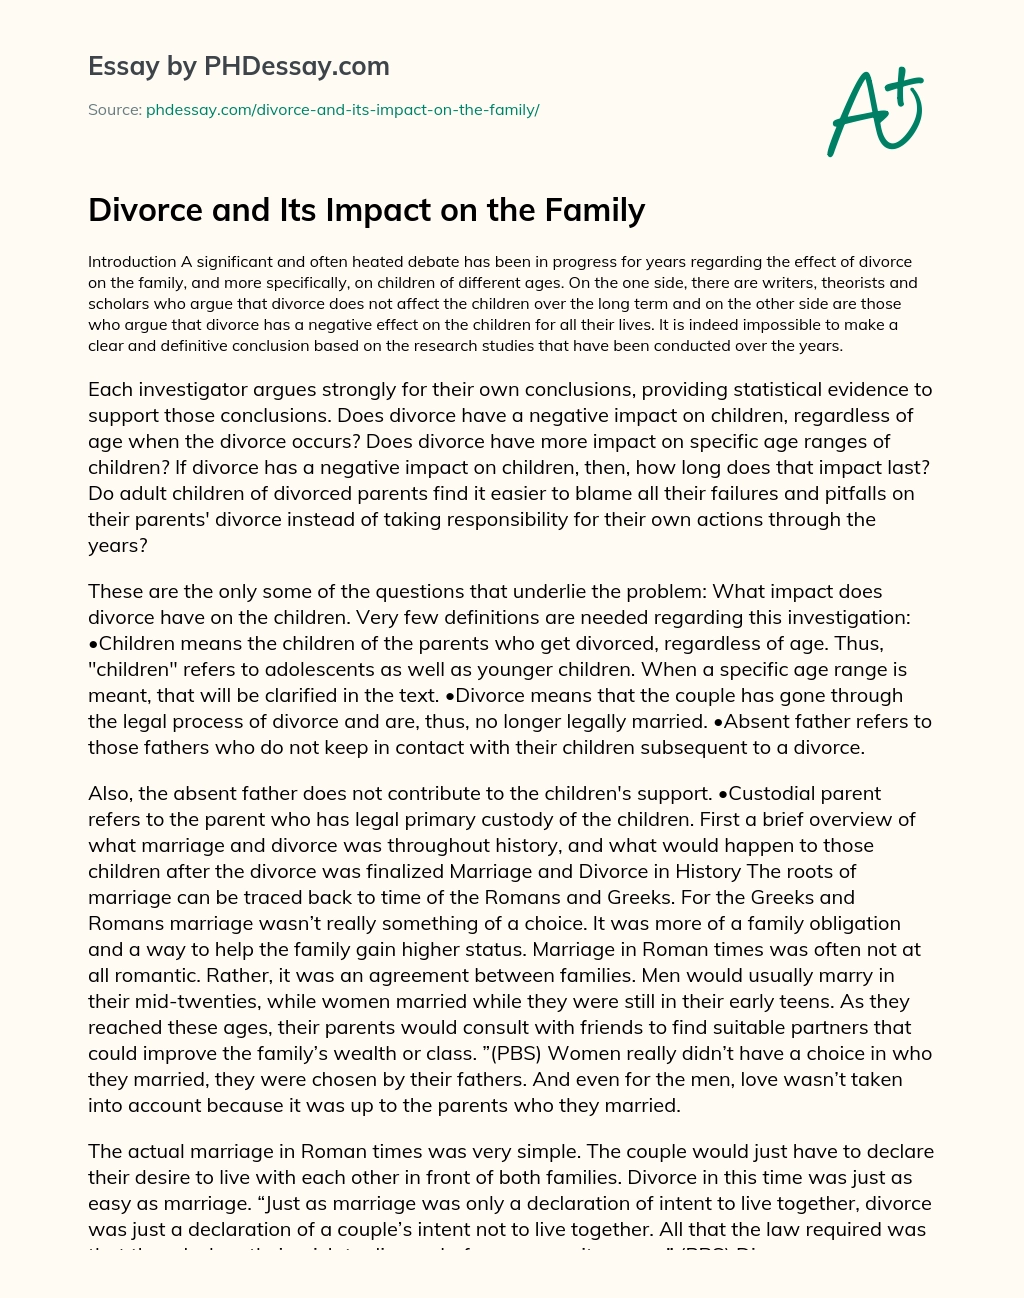 Divorce and Its Impact on the Family essay